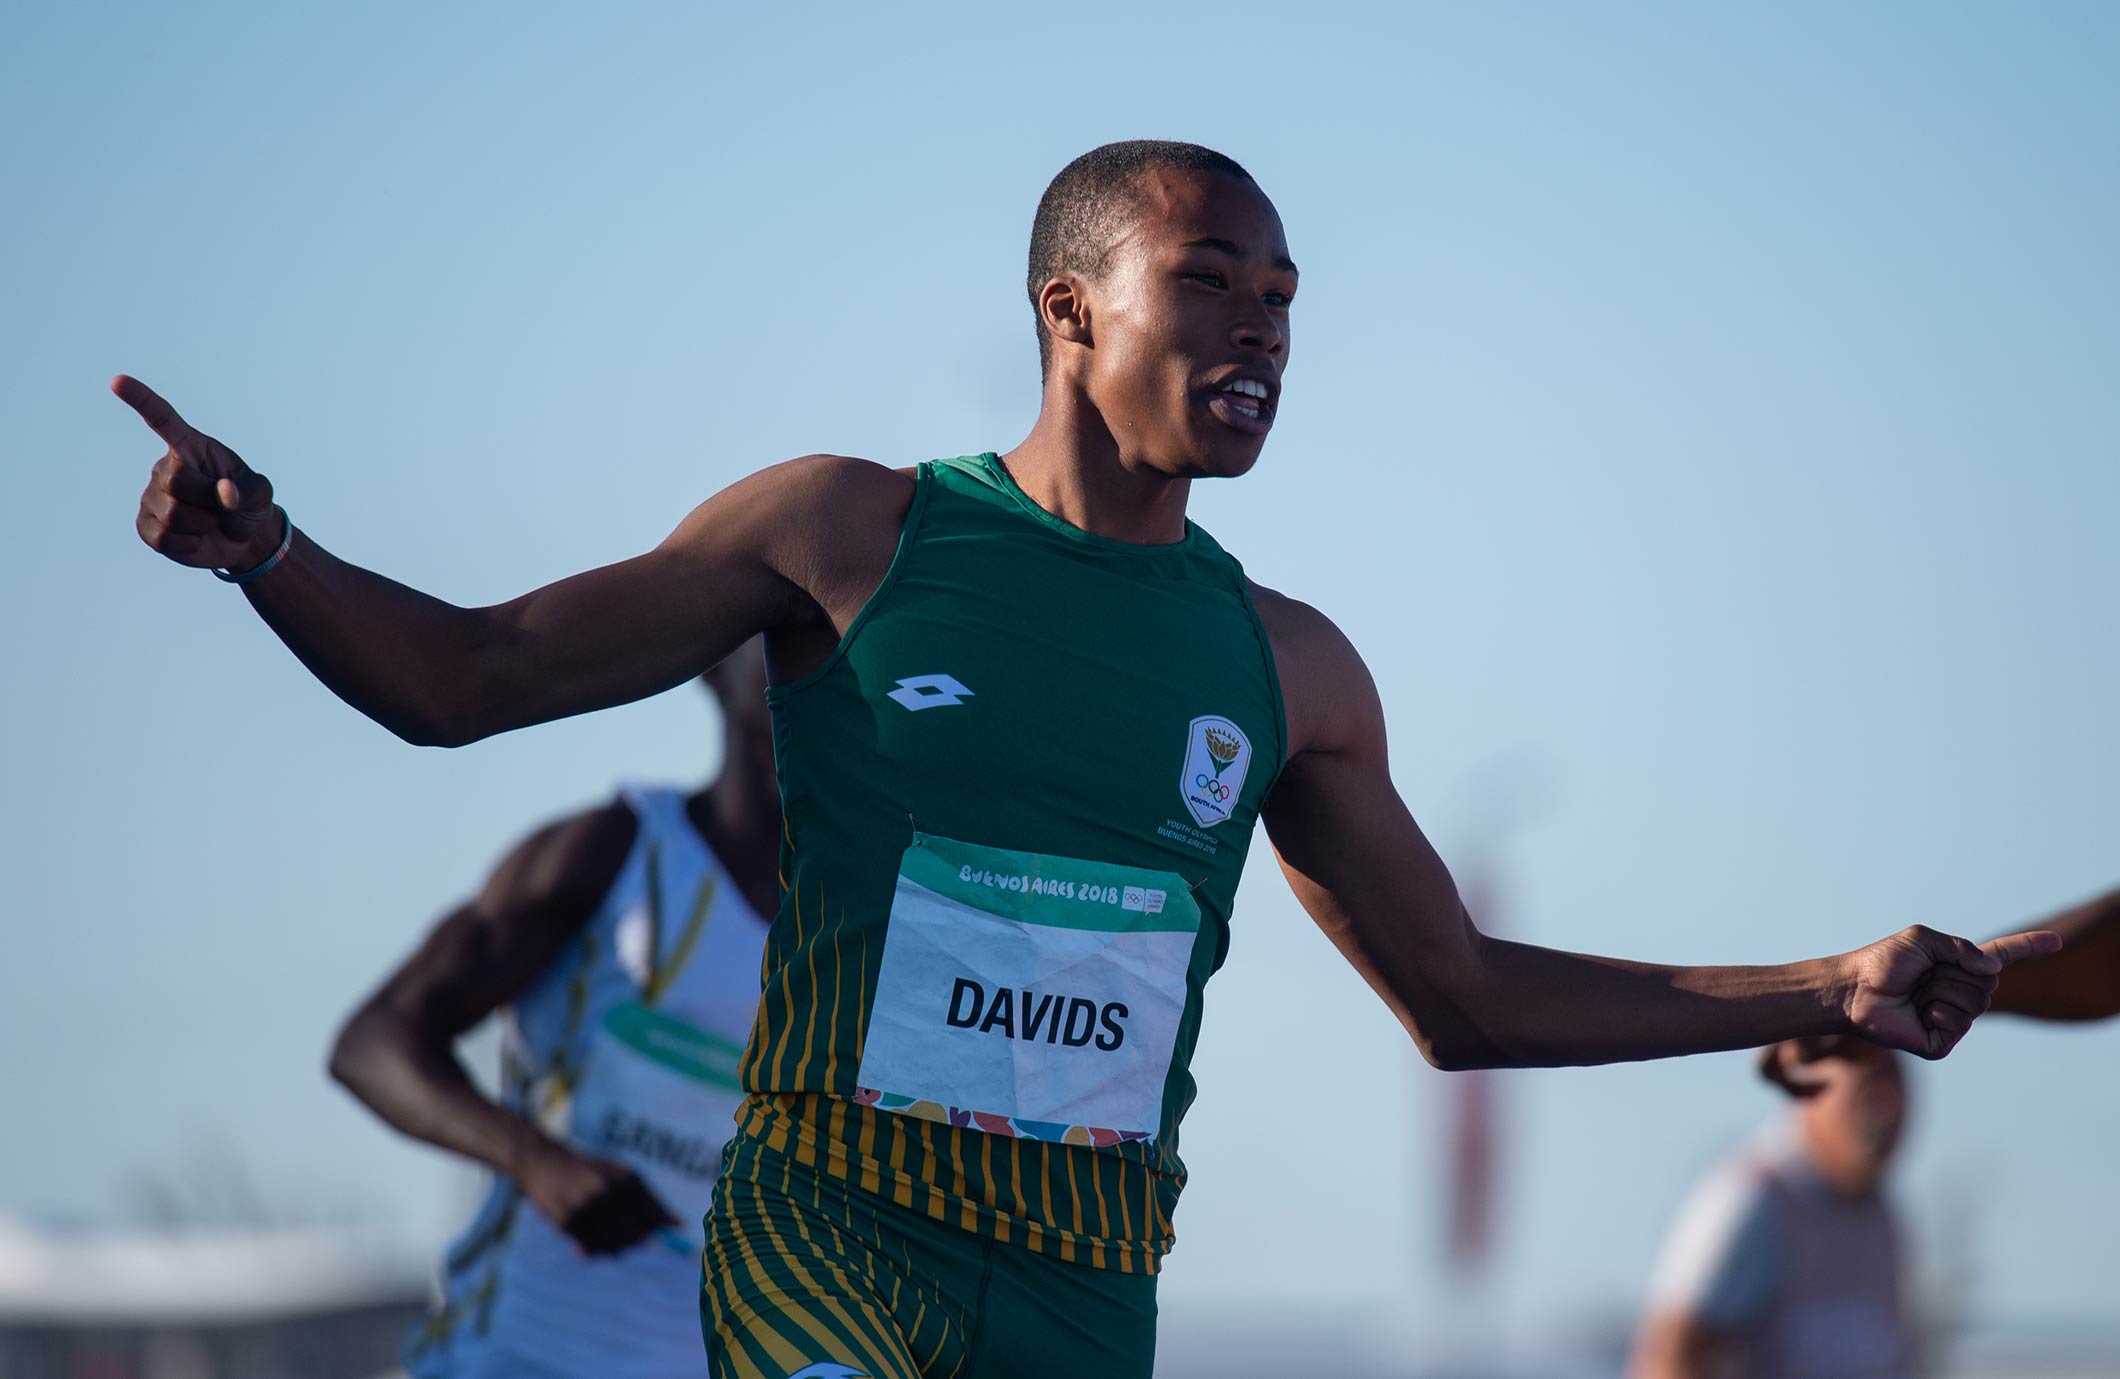 Davids became the fastest young man in the world with his victory at Buenos Aires 2018. (IOC/IOS)